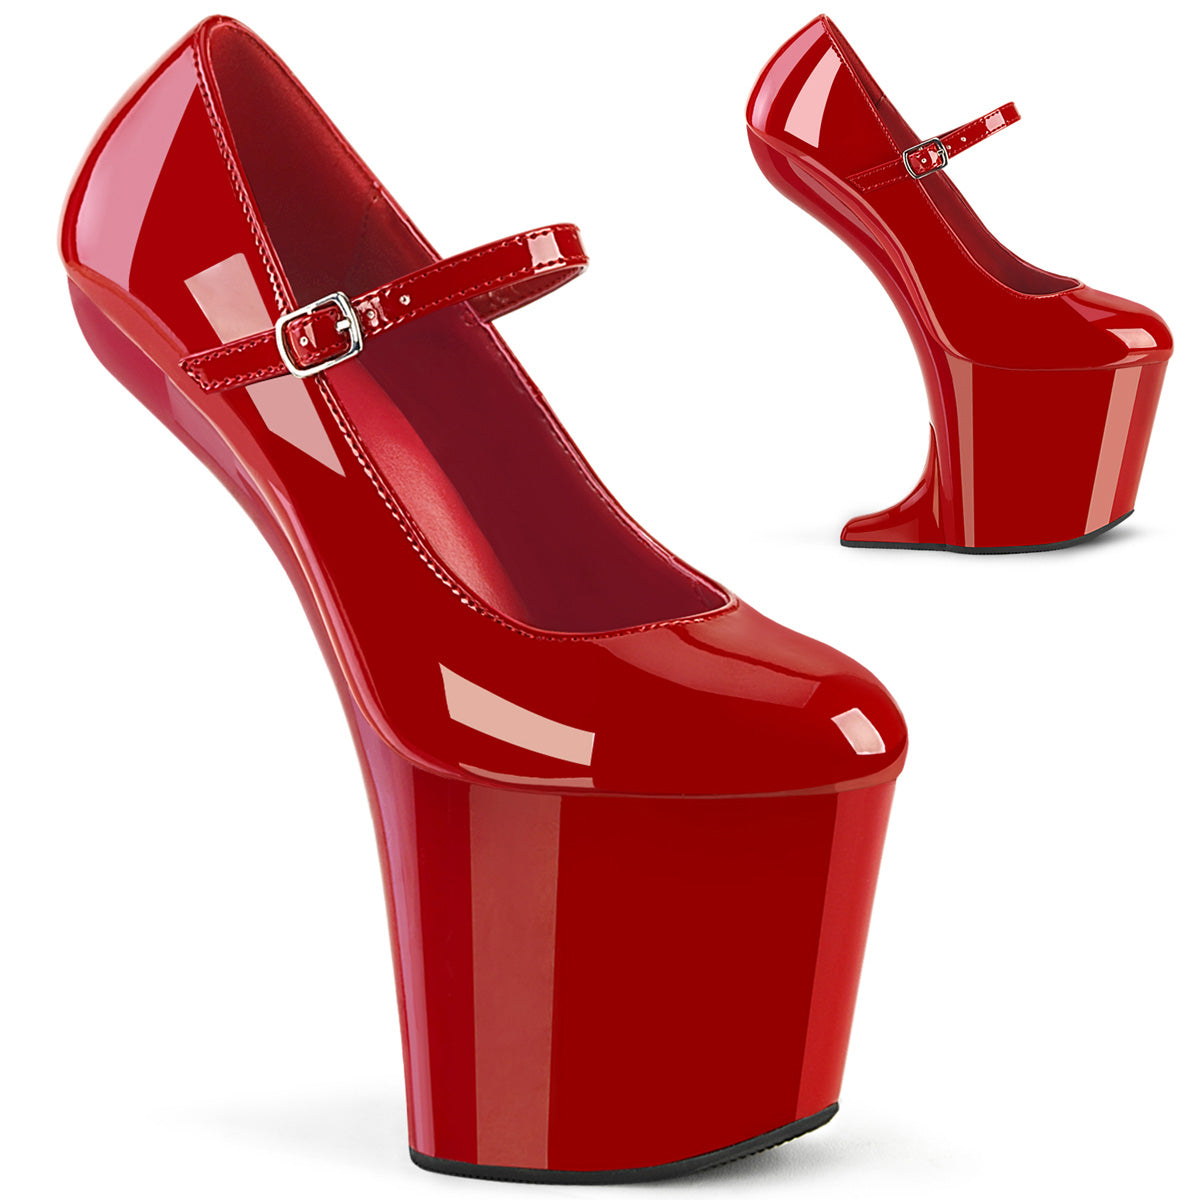 CRAZE-880 Red Patent/Red